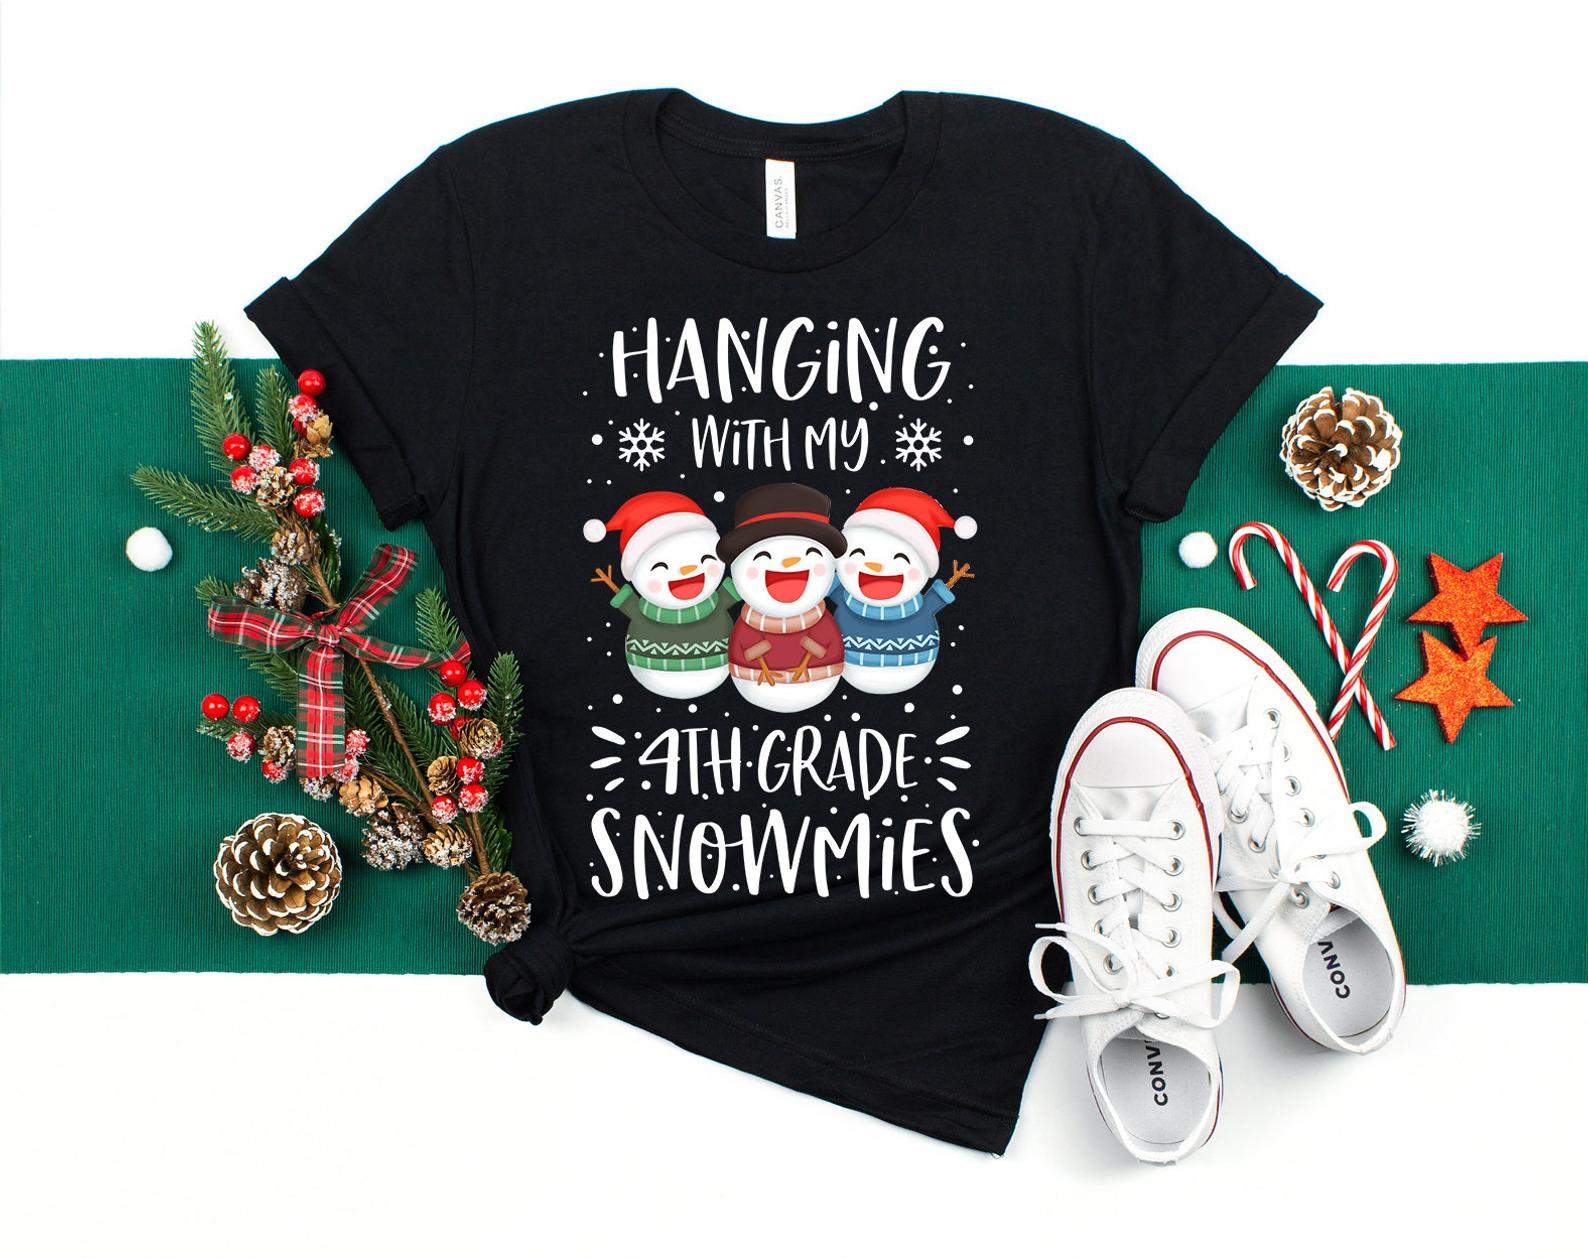 Hanging With My 4th Grade Snowmies T Shirt Black Unisex S-6XL